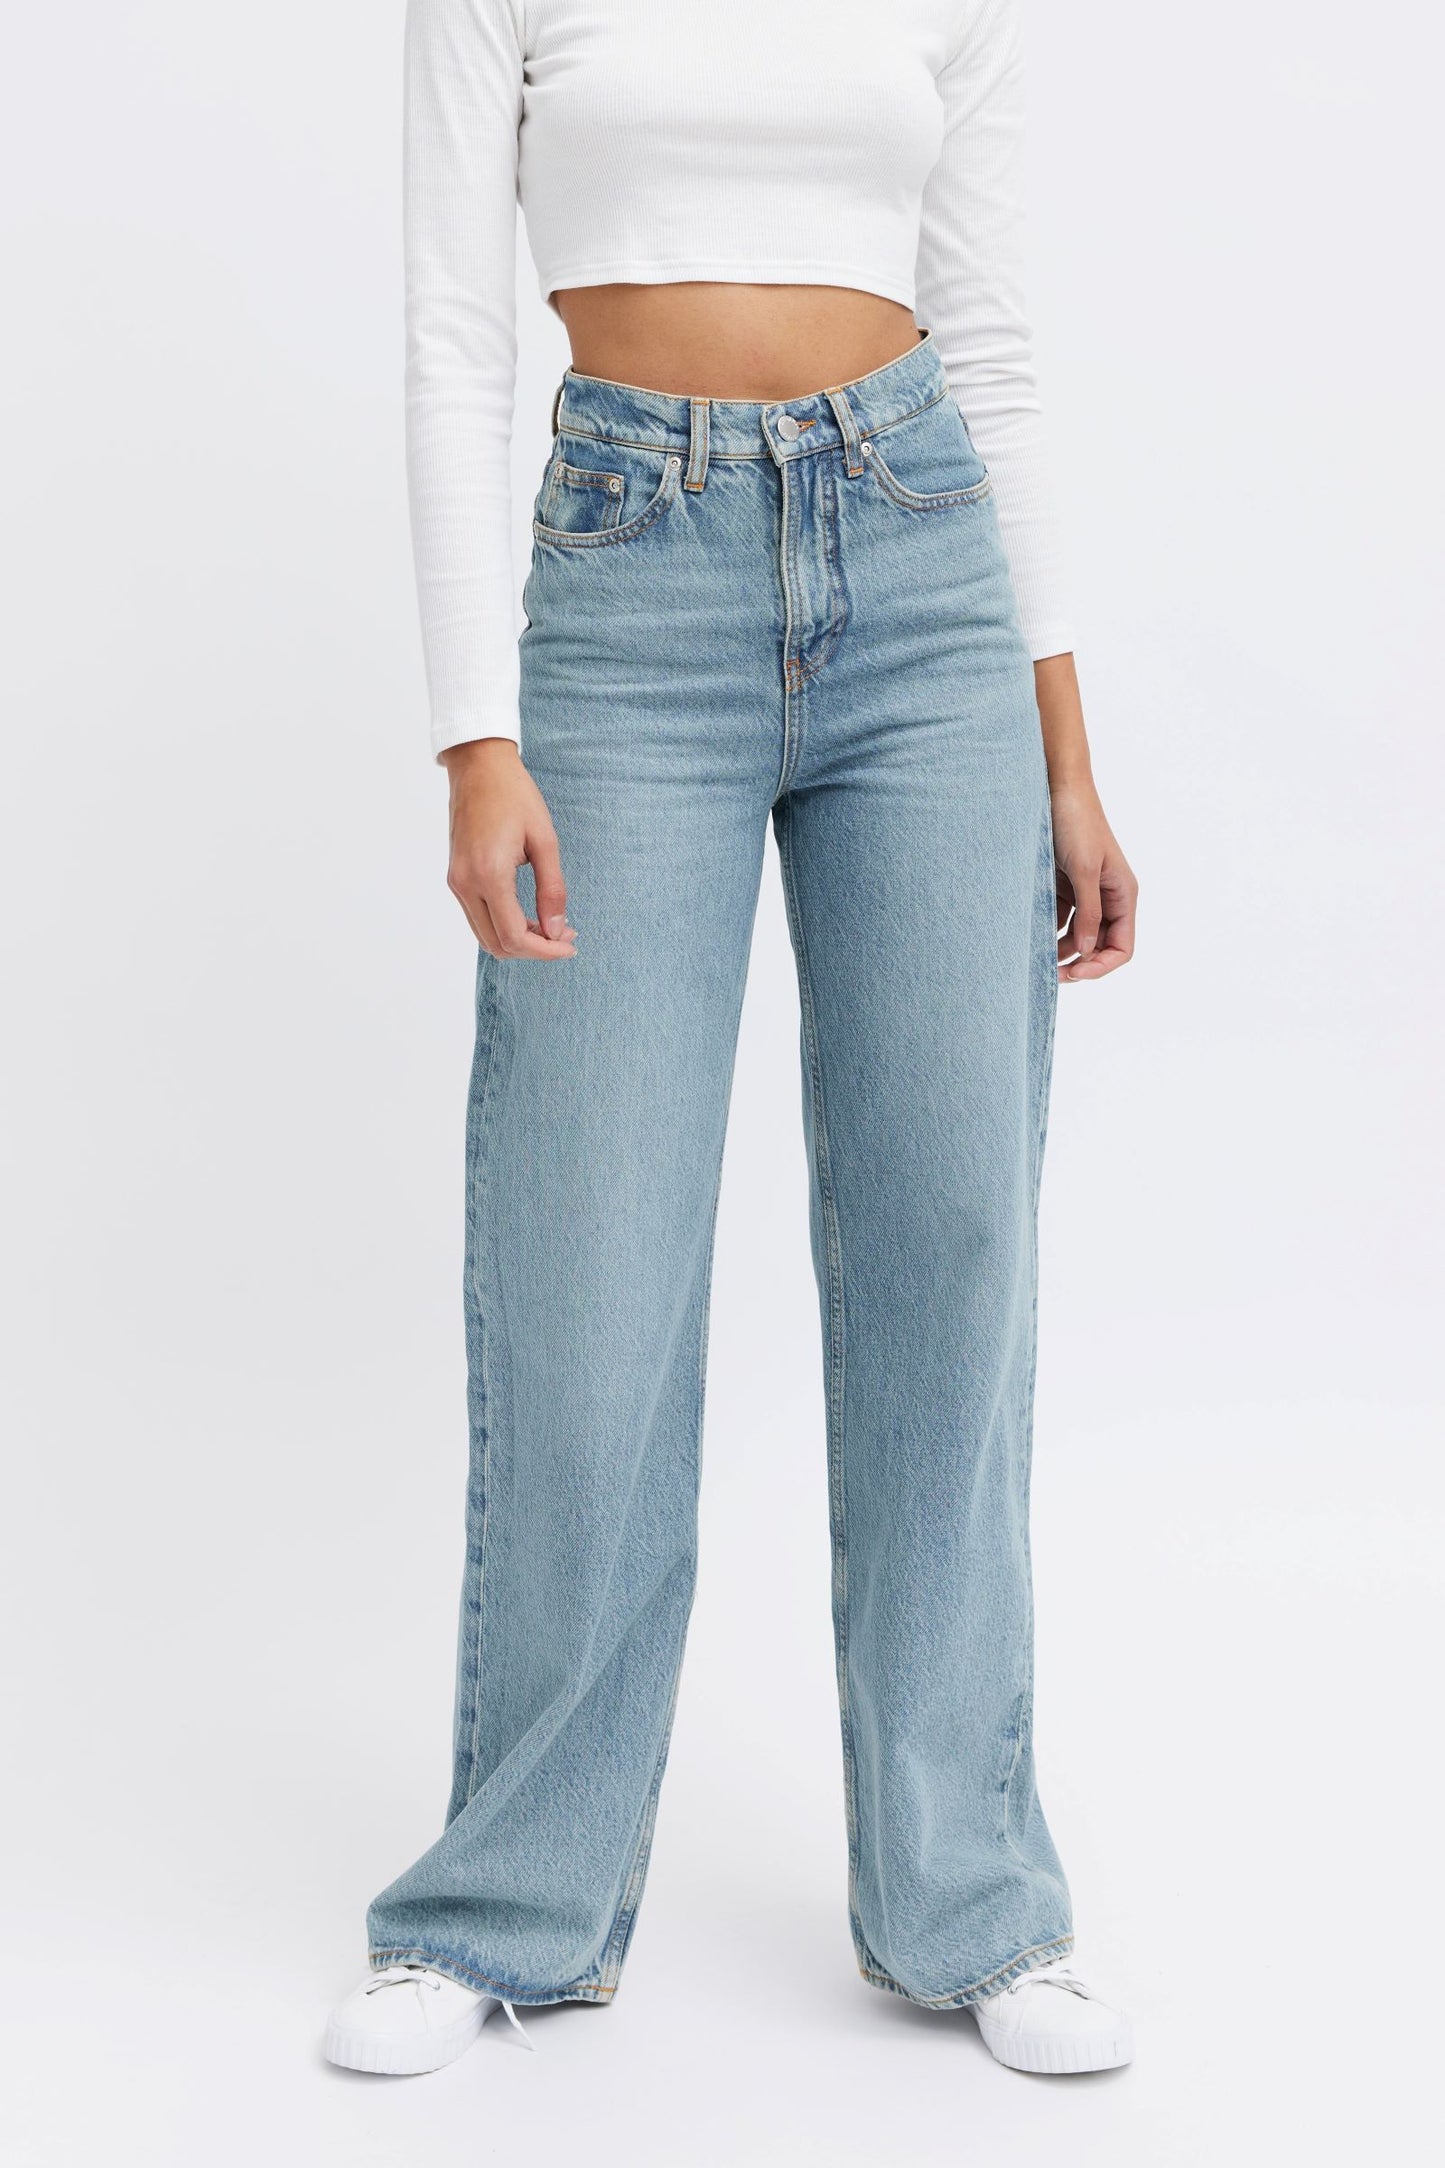 Women's organic jeans - style and fashion